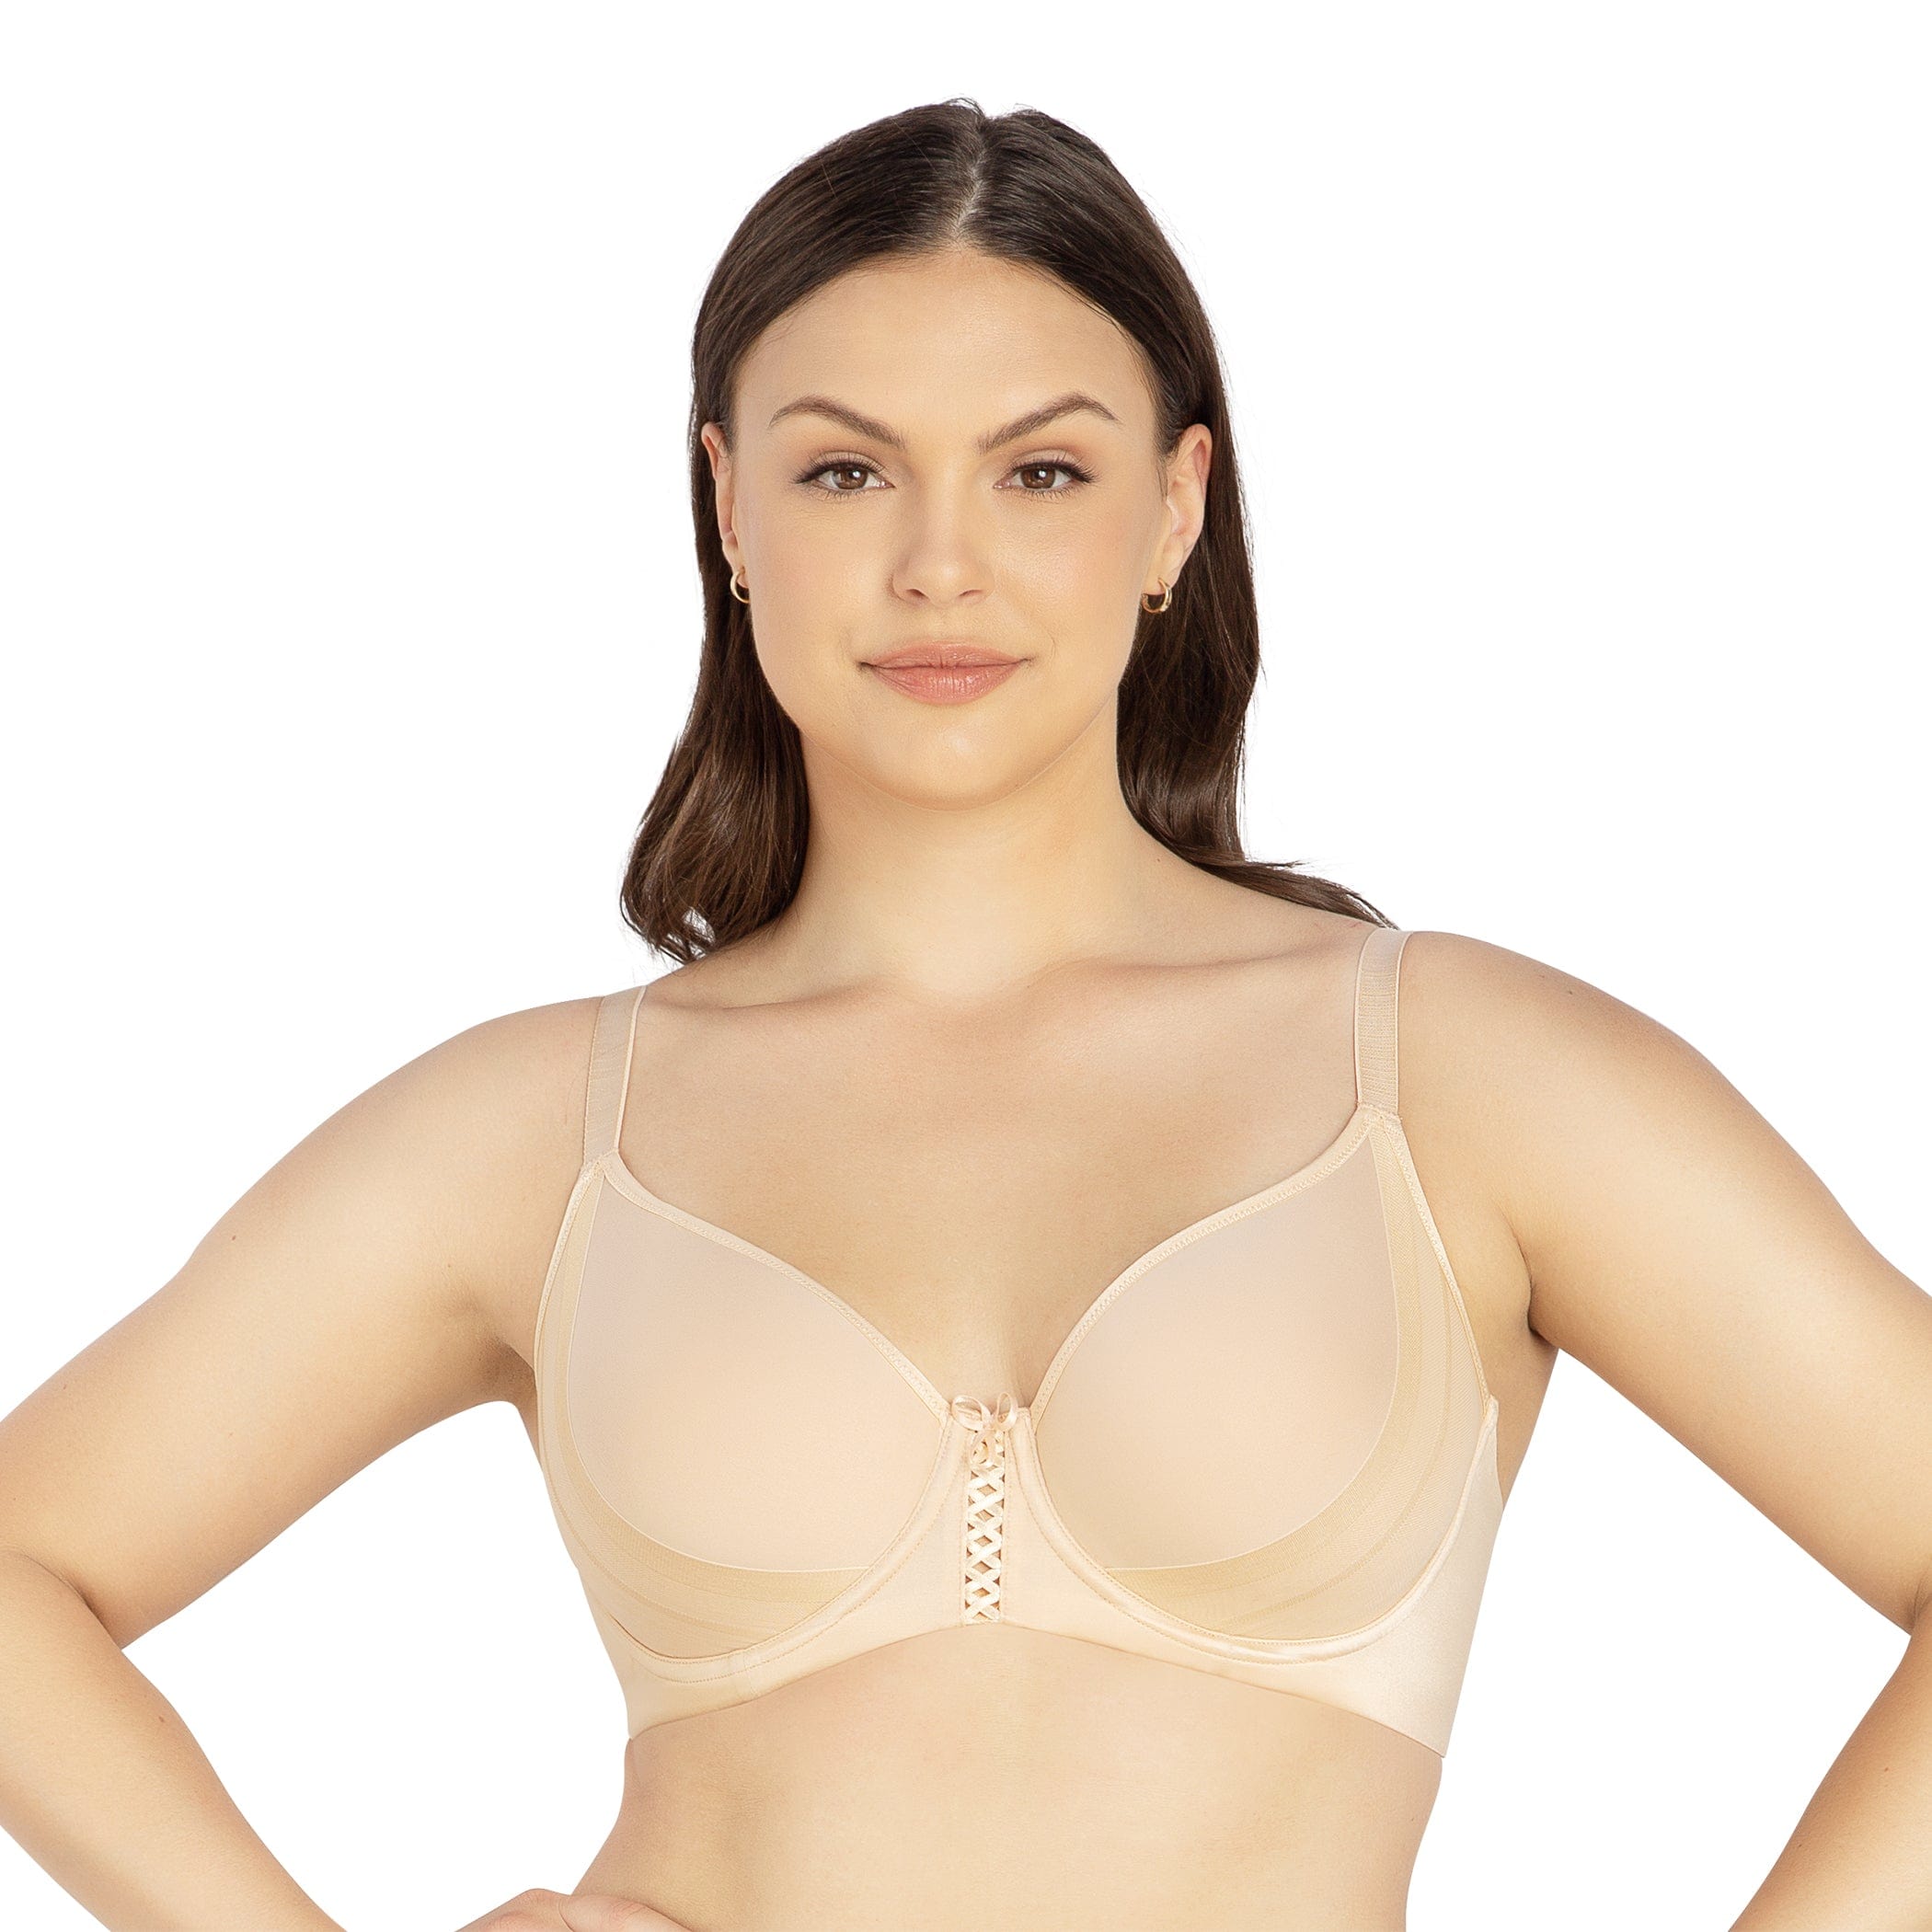 Essential Lingerie Item For Women With Larger Busts –, 42% OFF